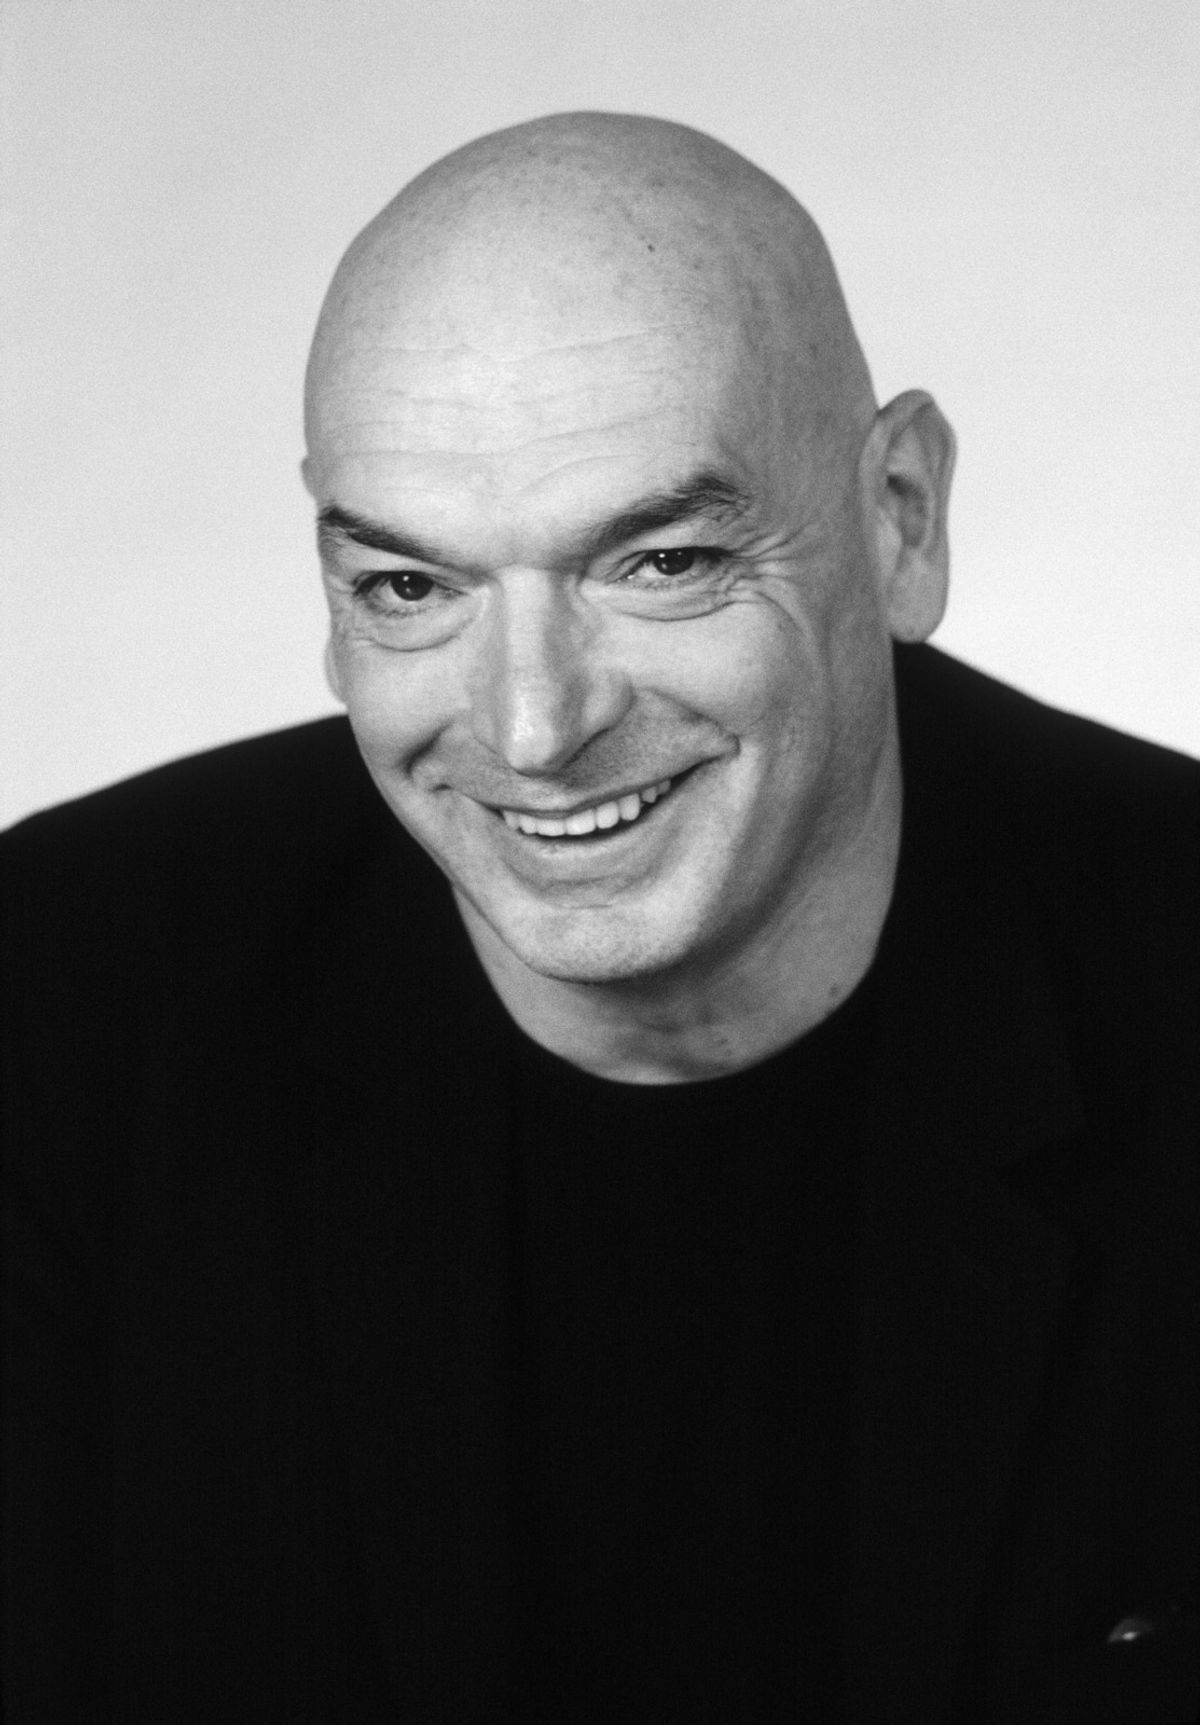 Jean Nouvel was first approached about designing the National Museum of Qatar in 2002 Photo: Gaston Bergeret